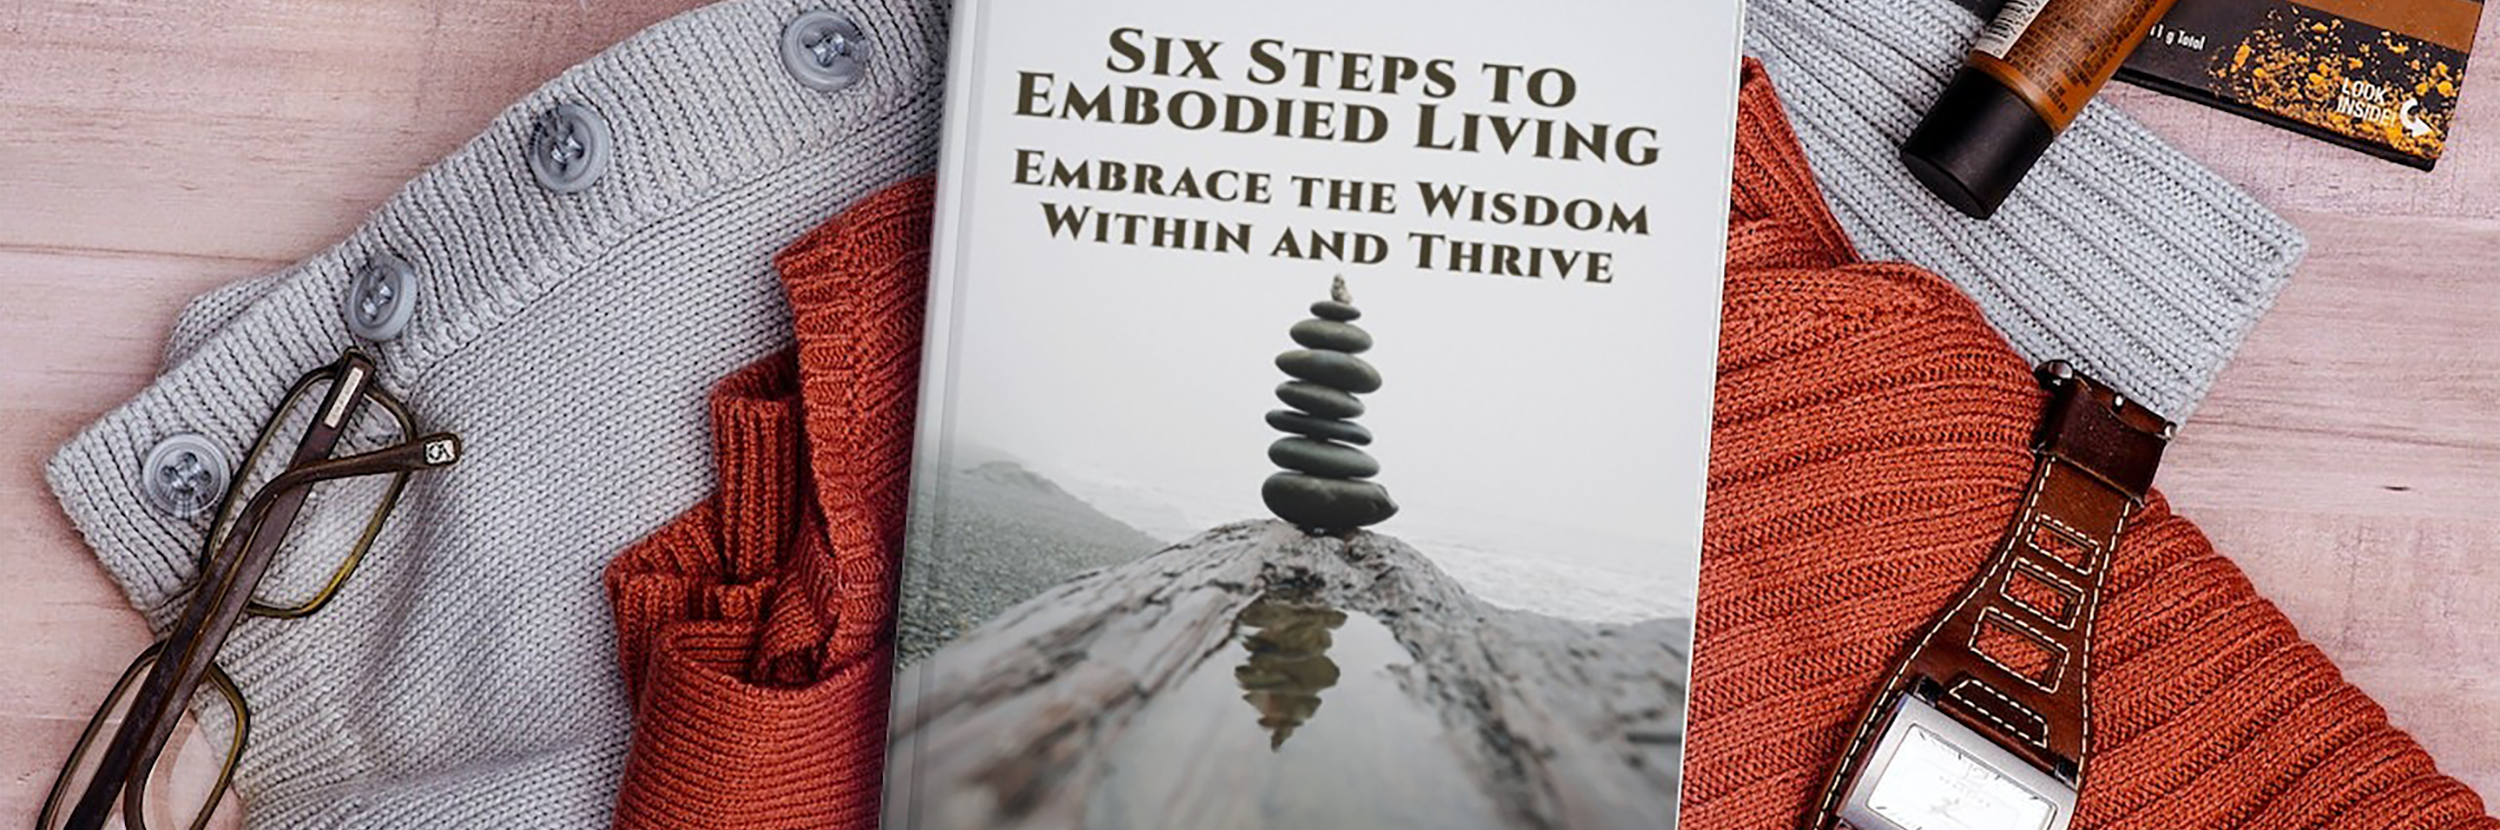 The Six Steps to Embodied Living: Embrace the Wisdom Within and Thrive e-book laying on a sweater with a pair of glasses in the corner.